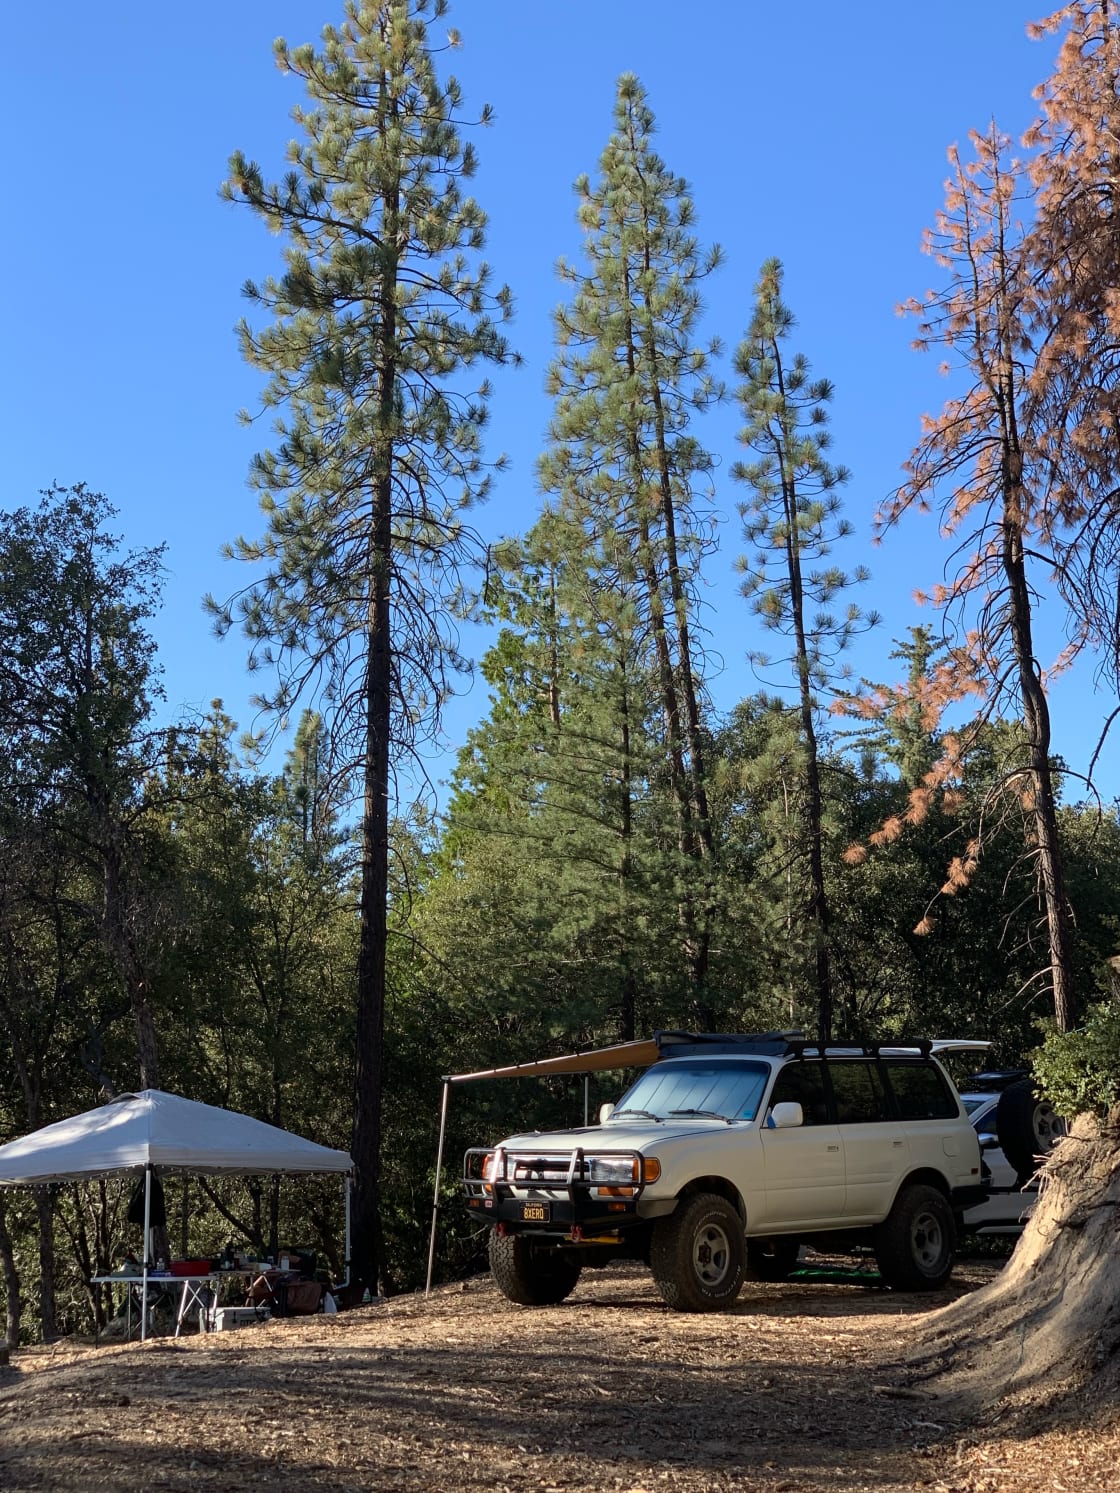 Campsite at the bottom of the hill (4x4 or AWD required).